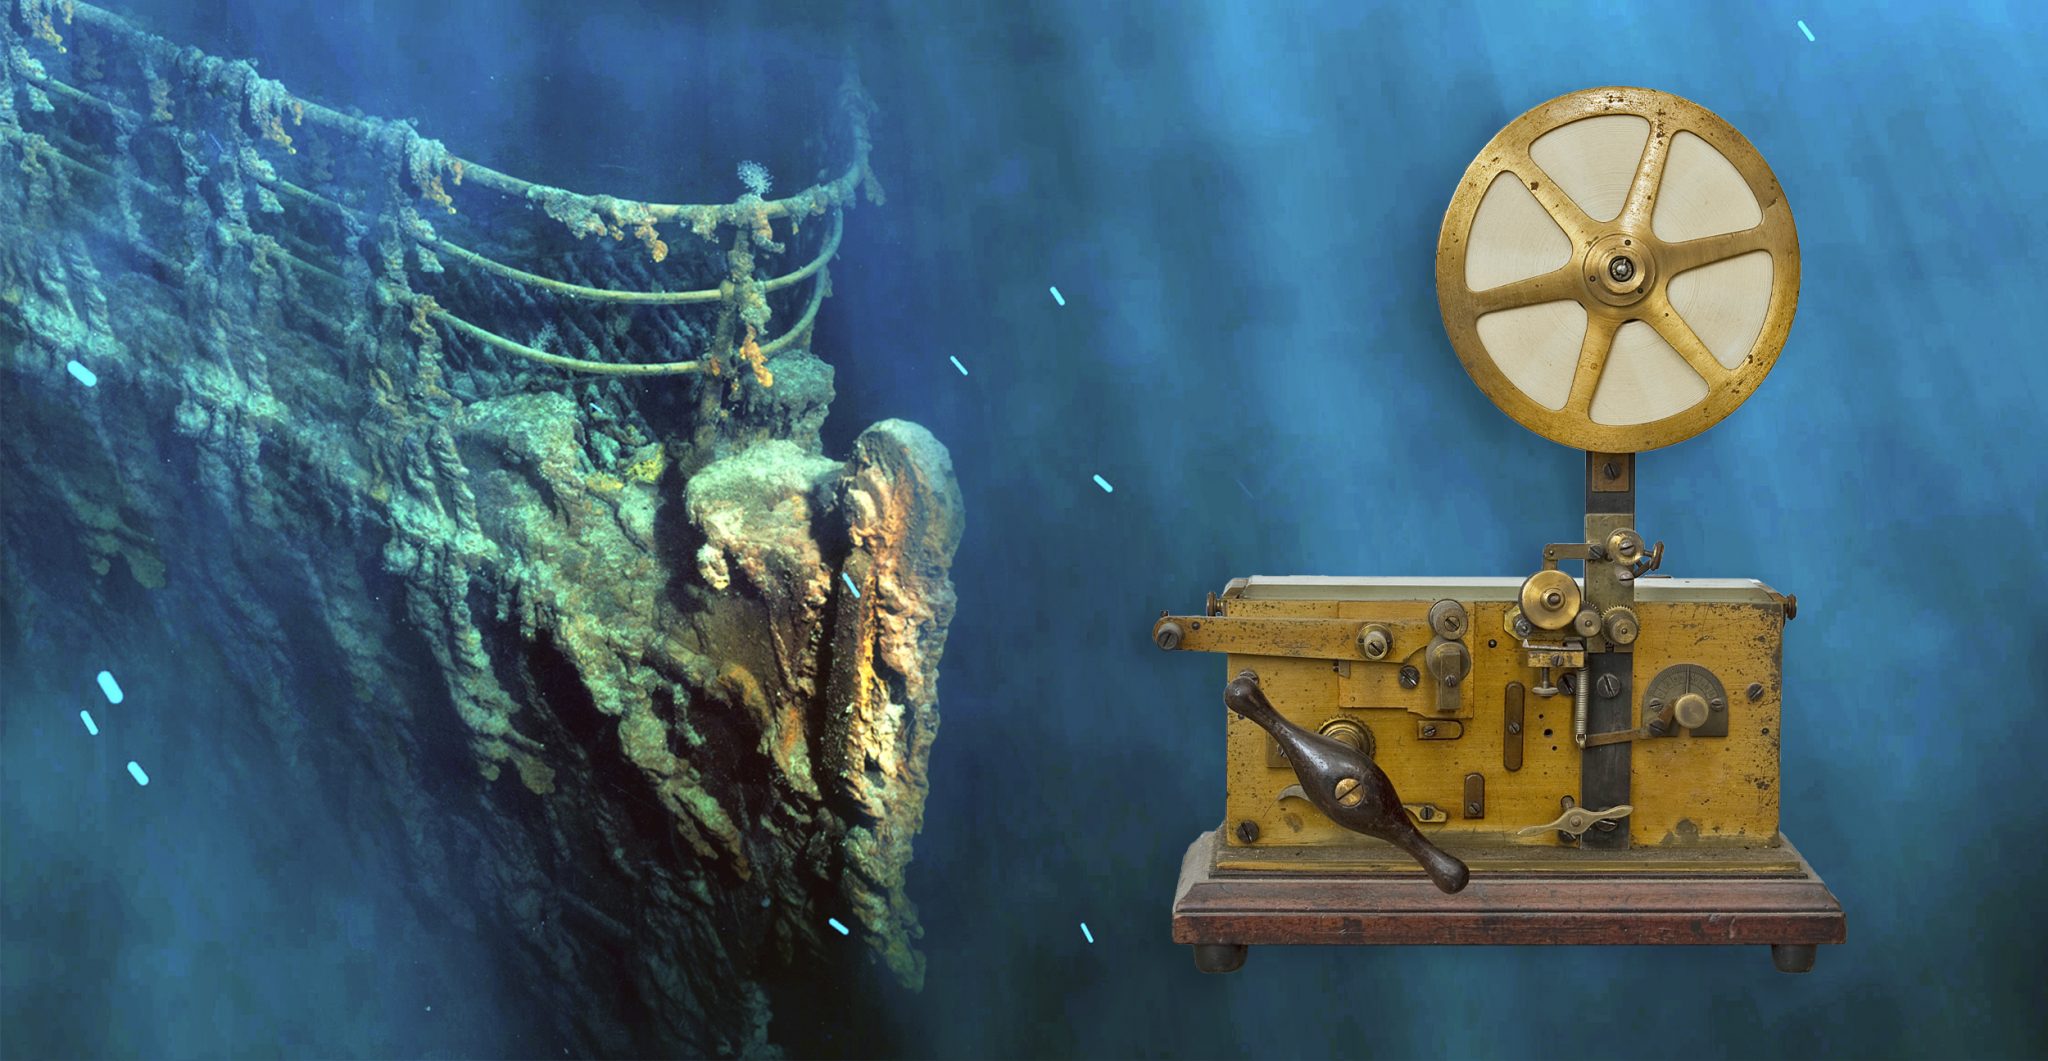 Salvage Team Wins Controversial Battle to Remove Artifacts from Titanic |  The Vintage News